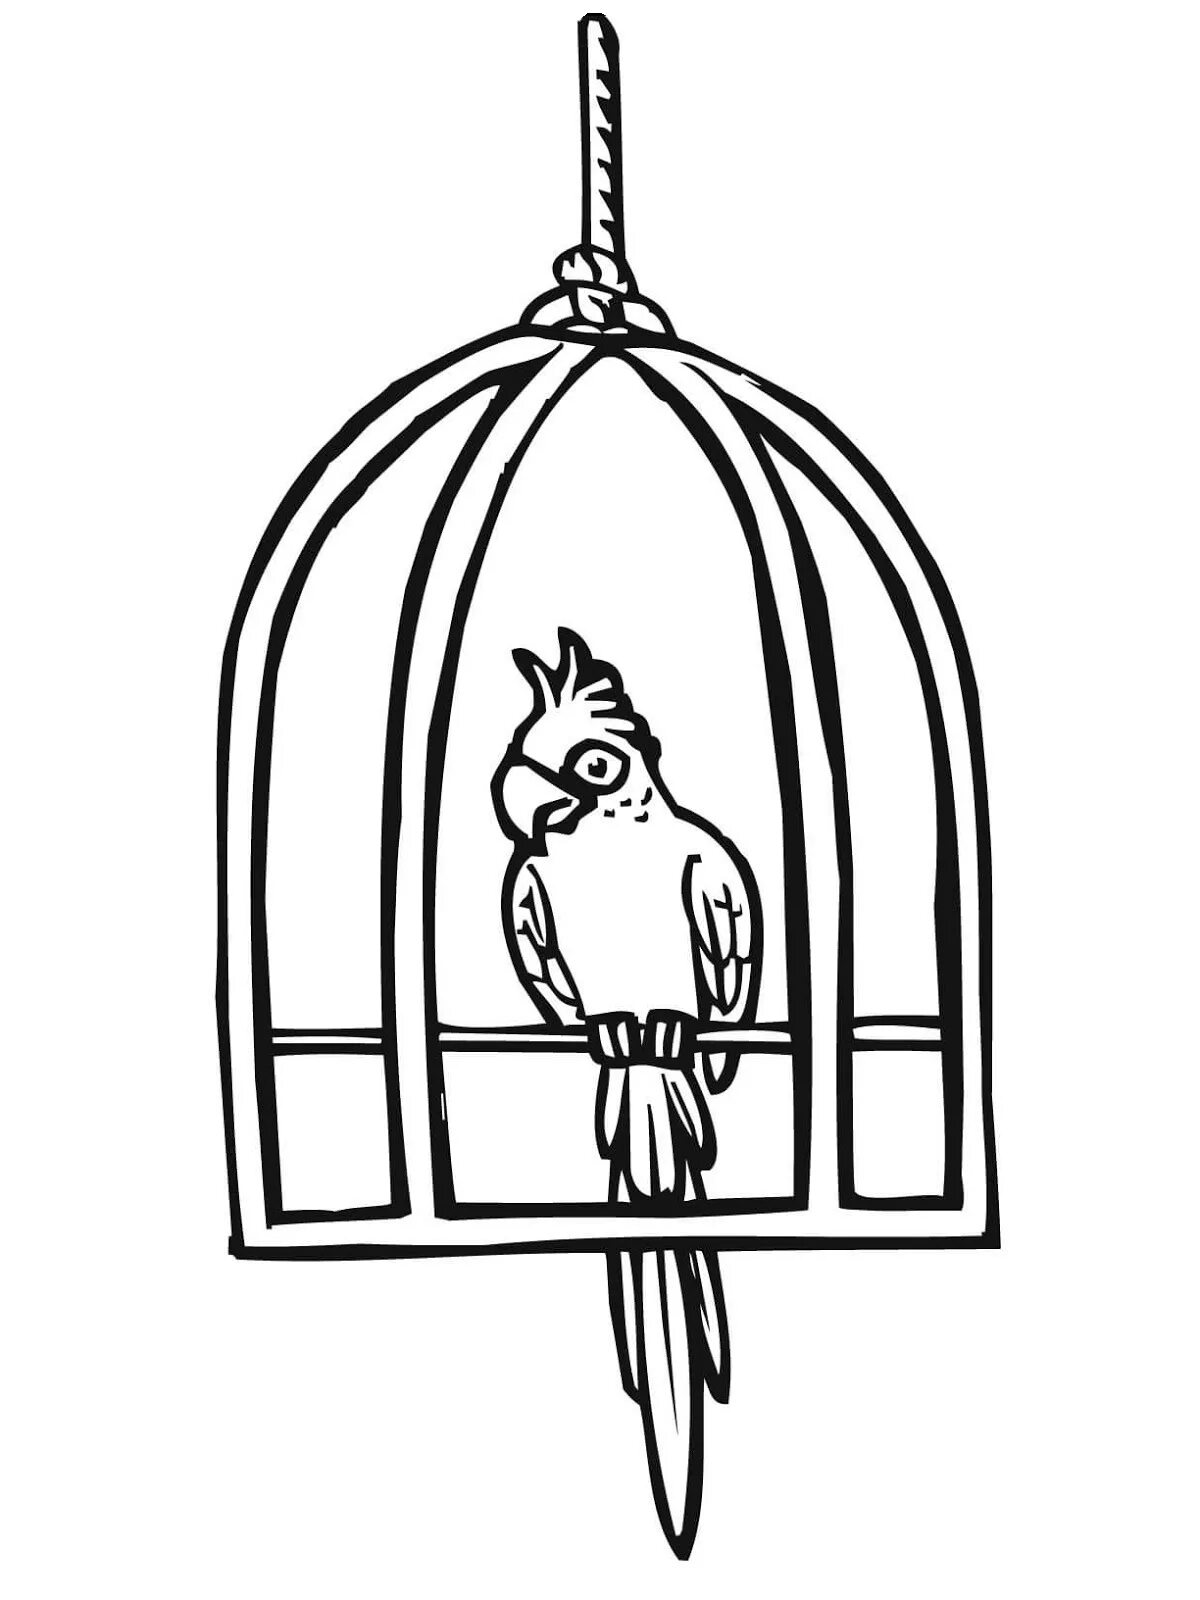 Caged parrot #10